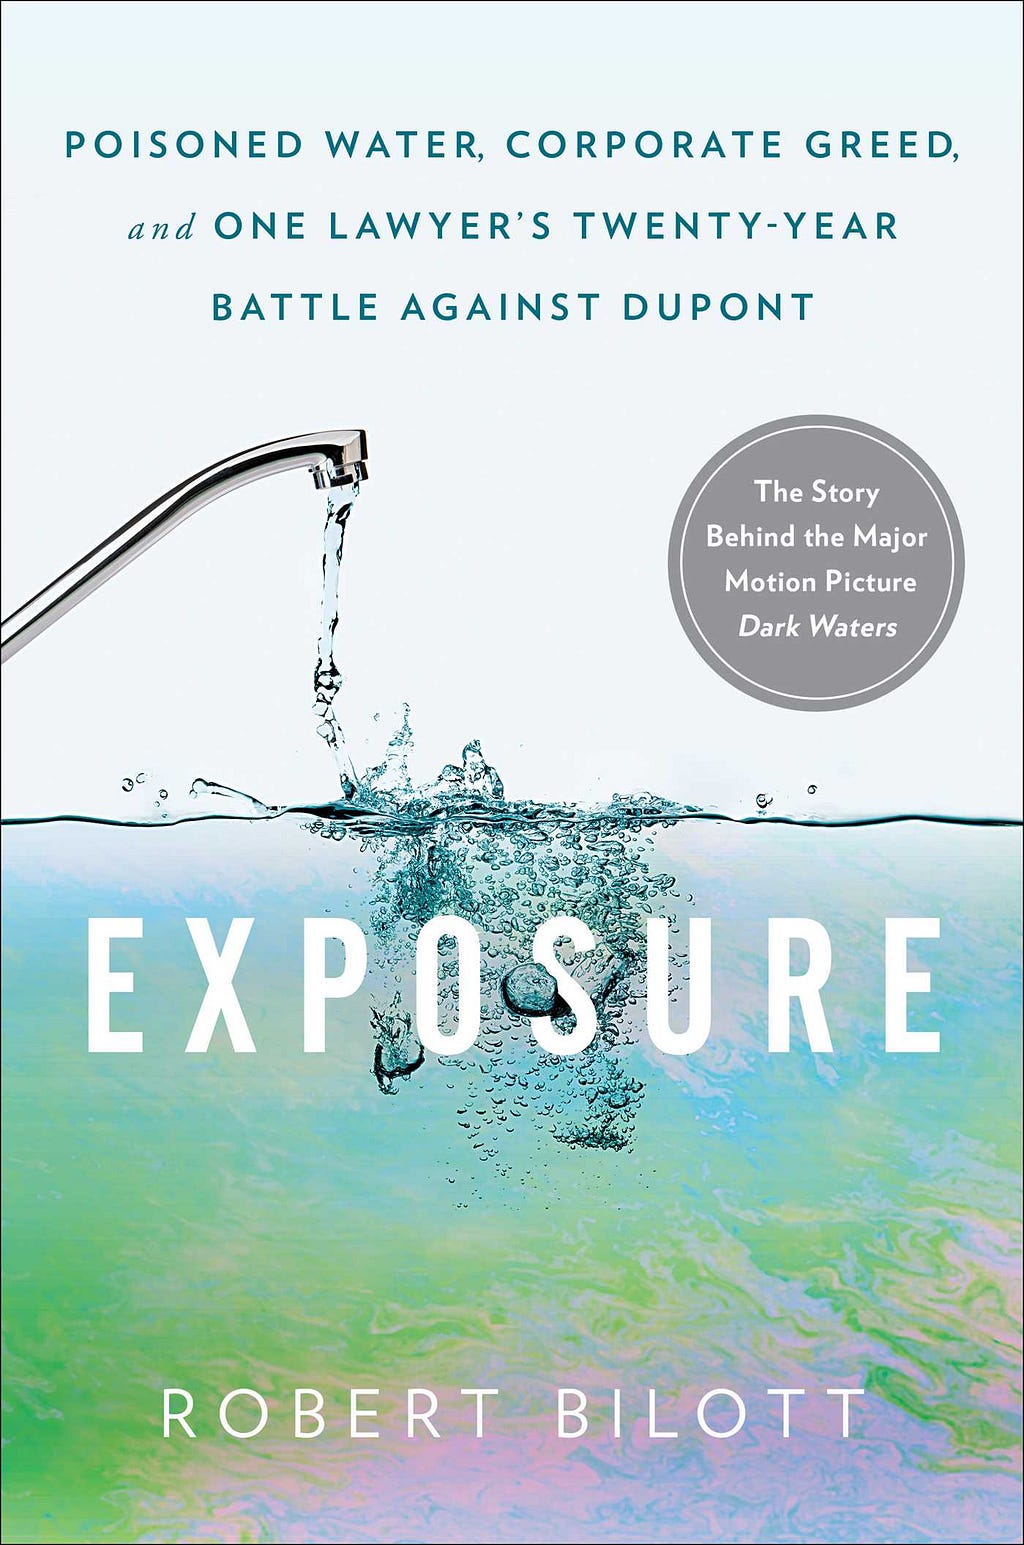 PDF Exposure: Poisoned Water, Corporate Greed, and One Lawyer's Twenty-Year Battle against DuPont By Robert Bilott